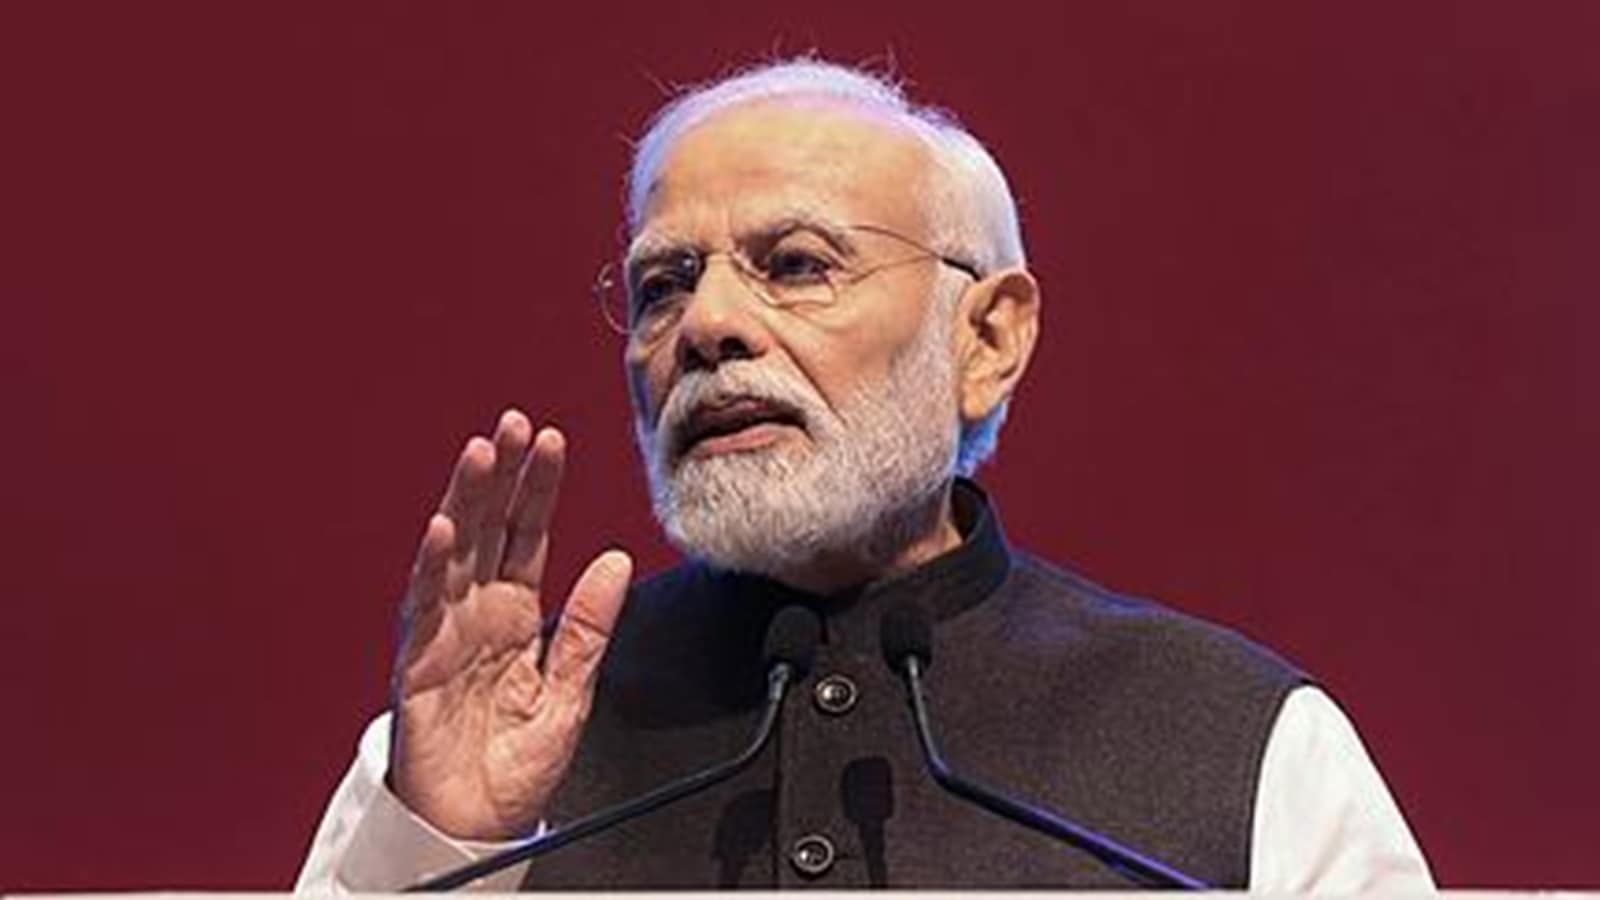 Government has increased employment in traditional and emerging sectors: Prime Minister Modi